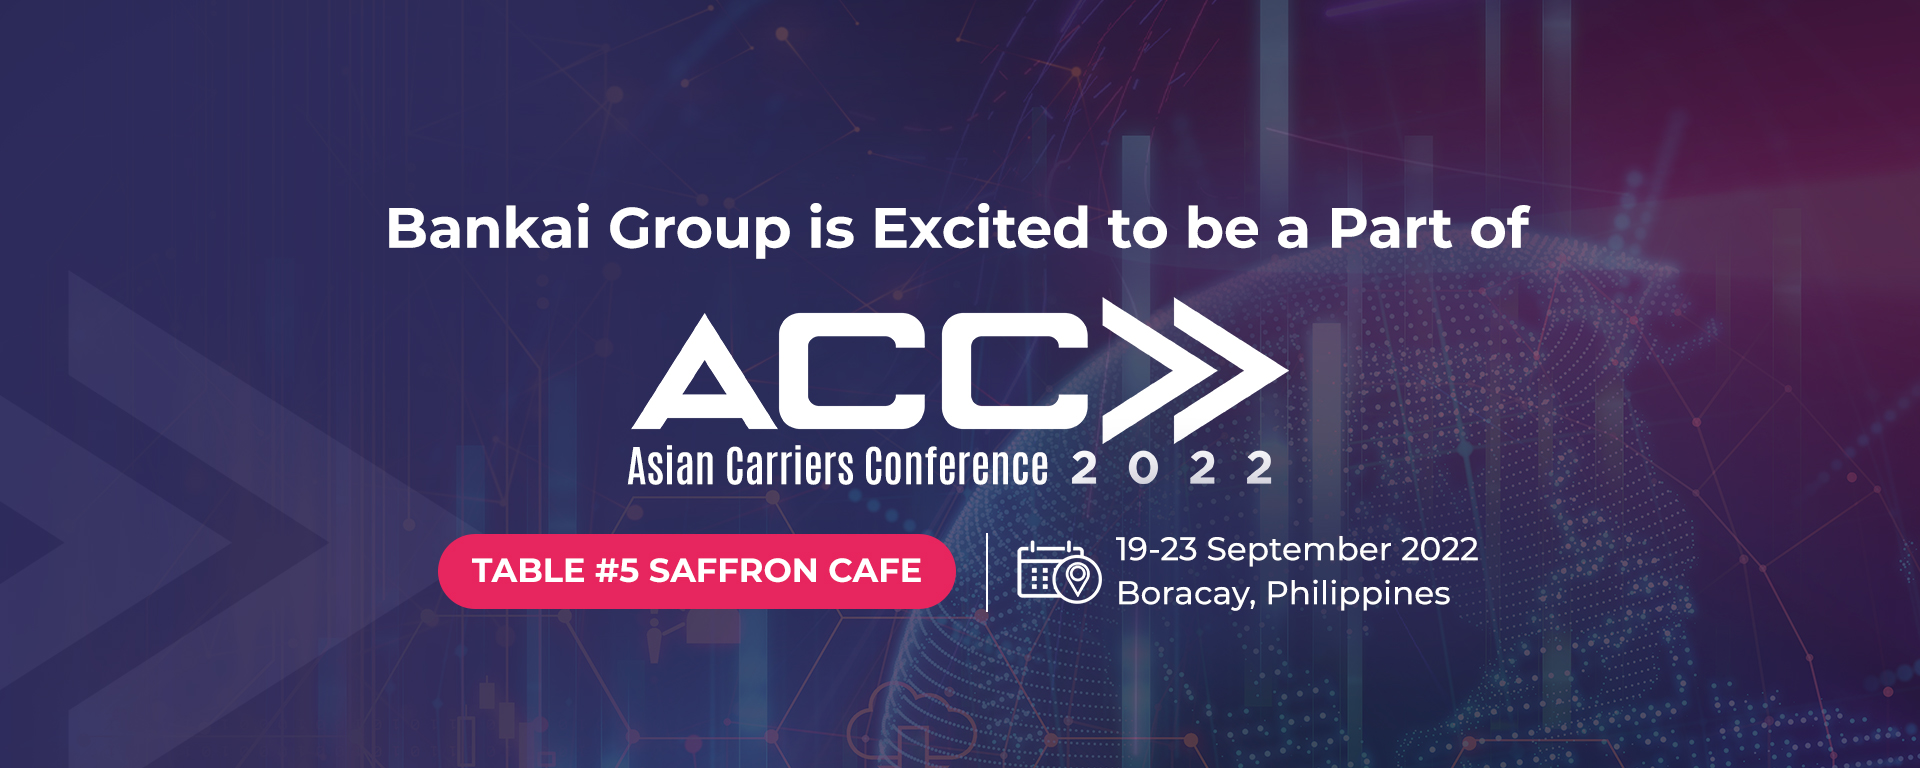 Bankai Group is Excited to be a Part of the ACC 2022